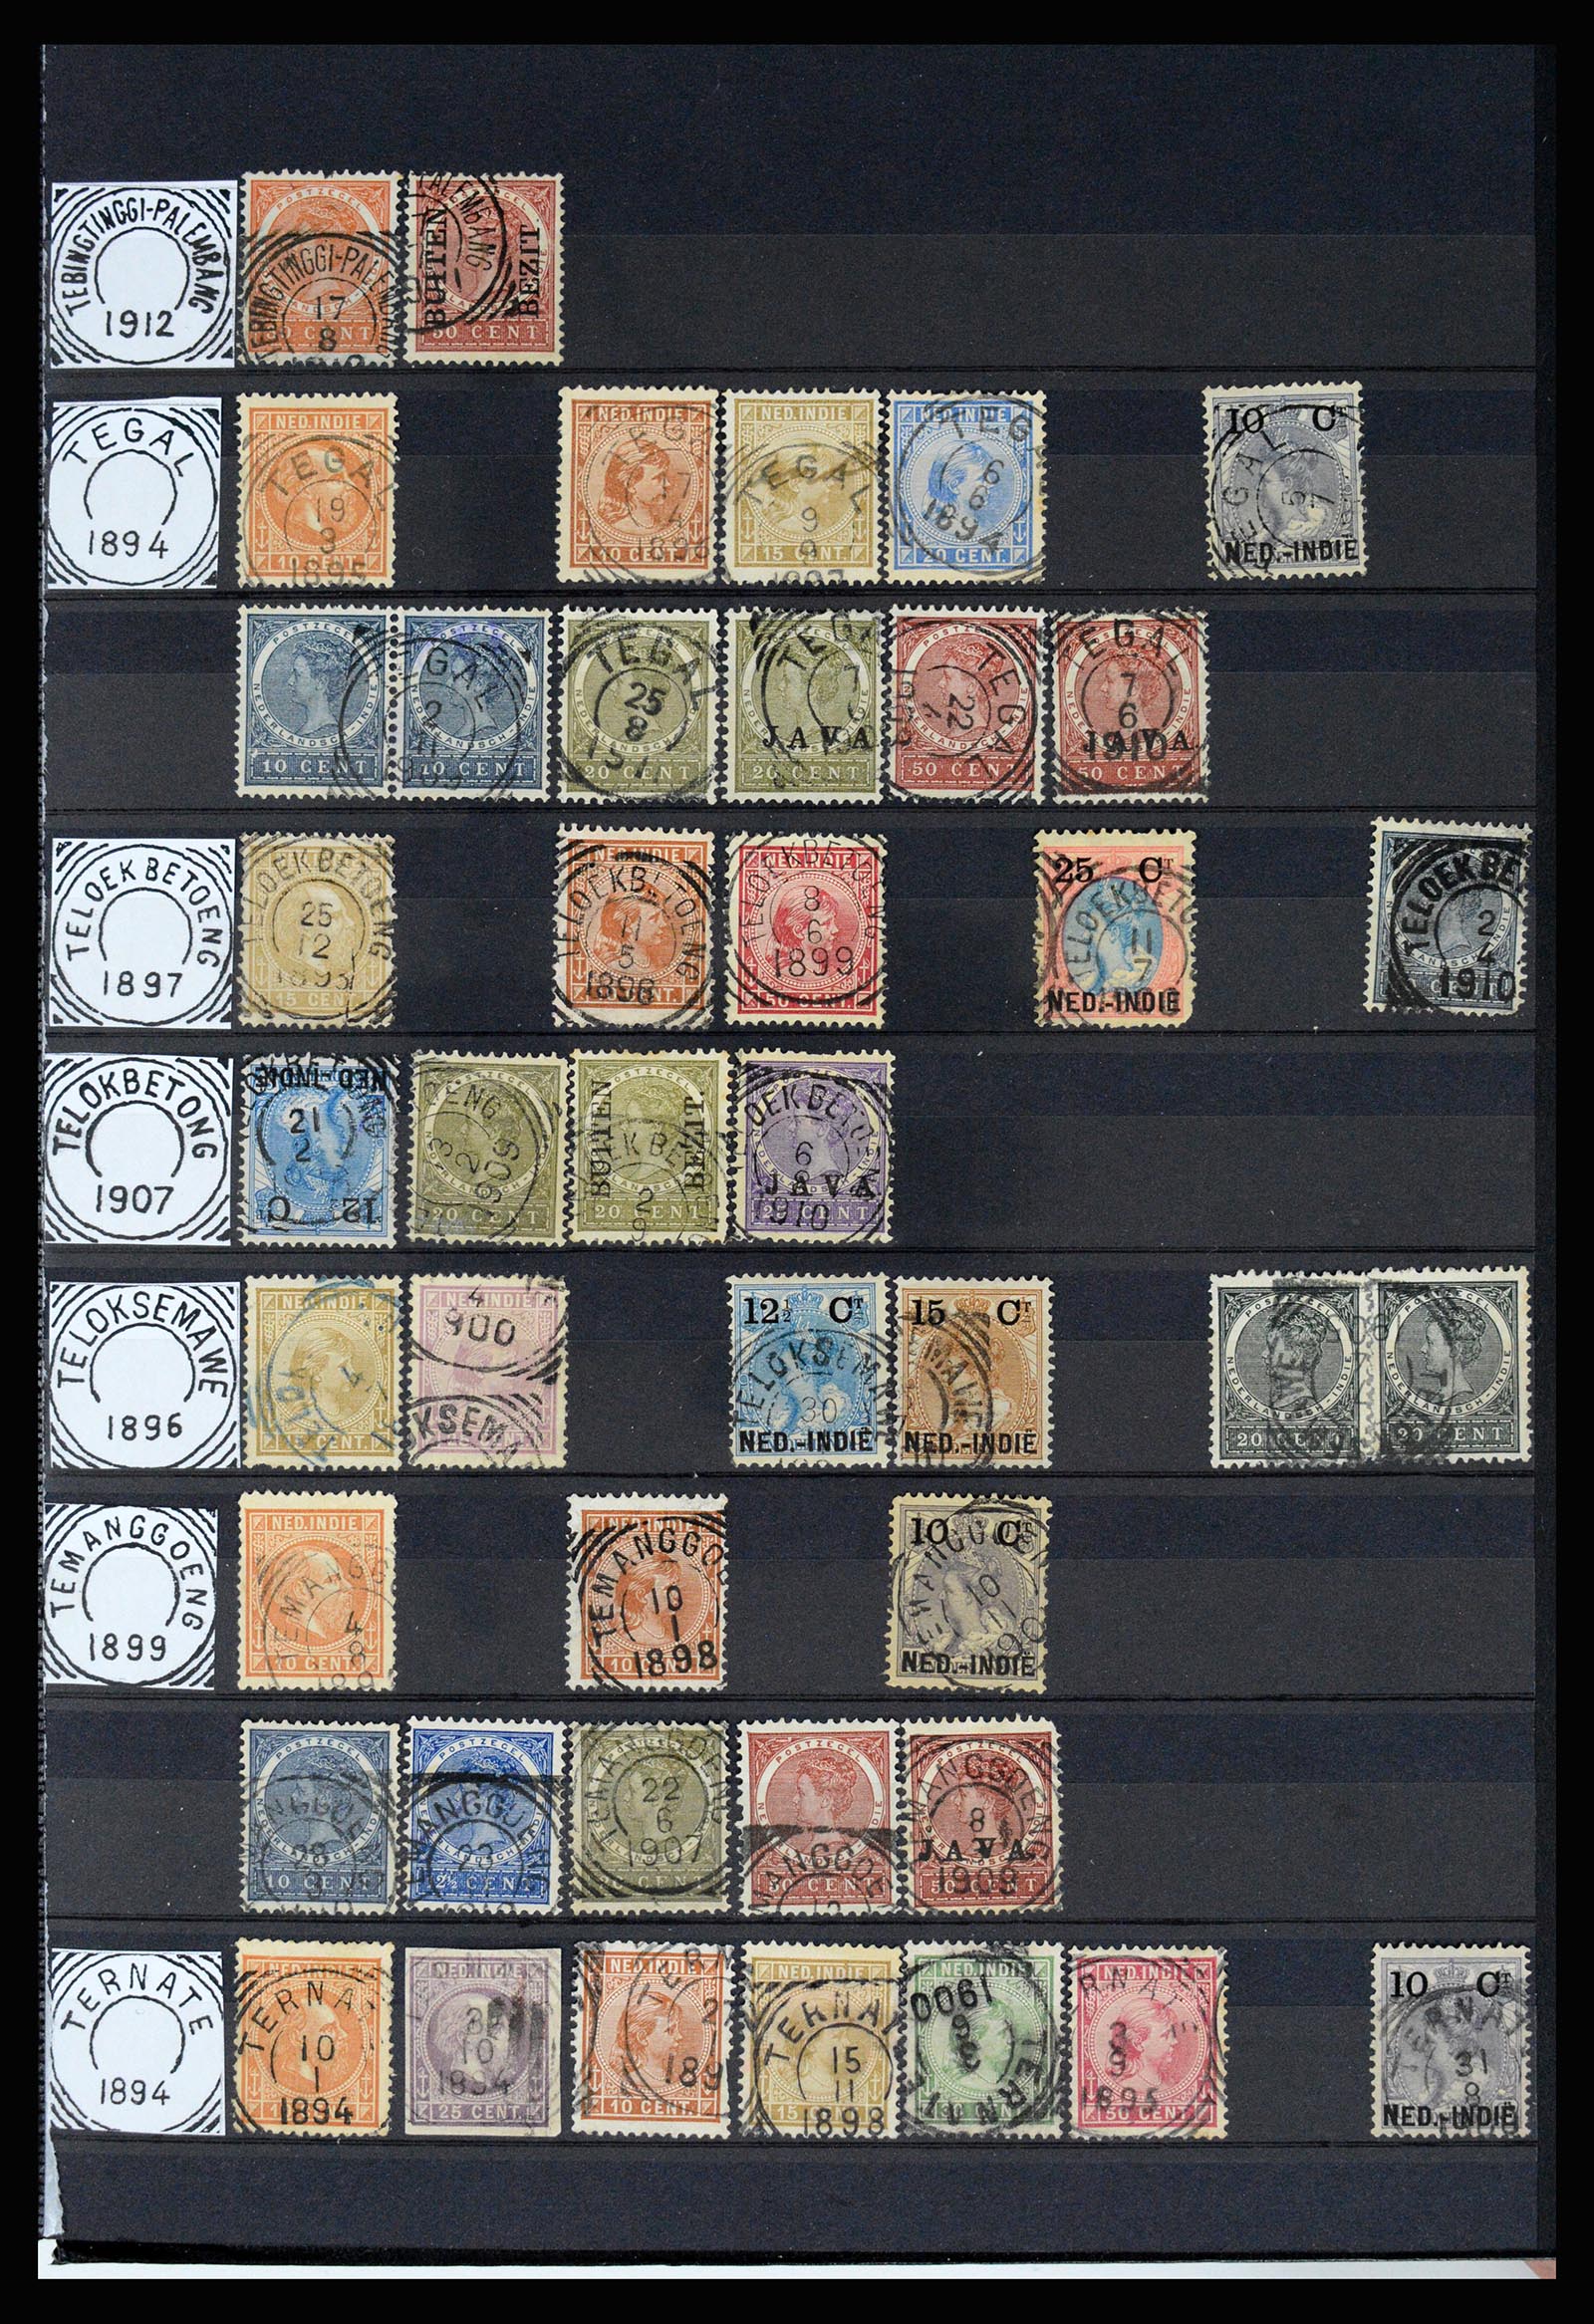 36839 054 - Stamp collection 36839 Dutch east Indies square cancels.